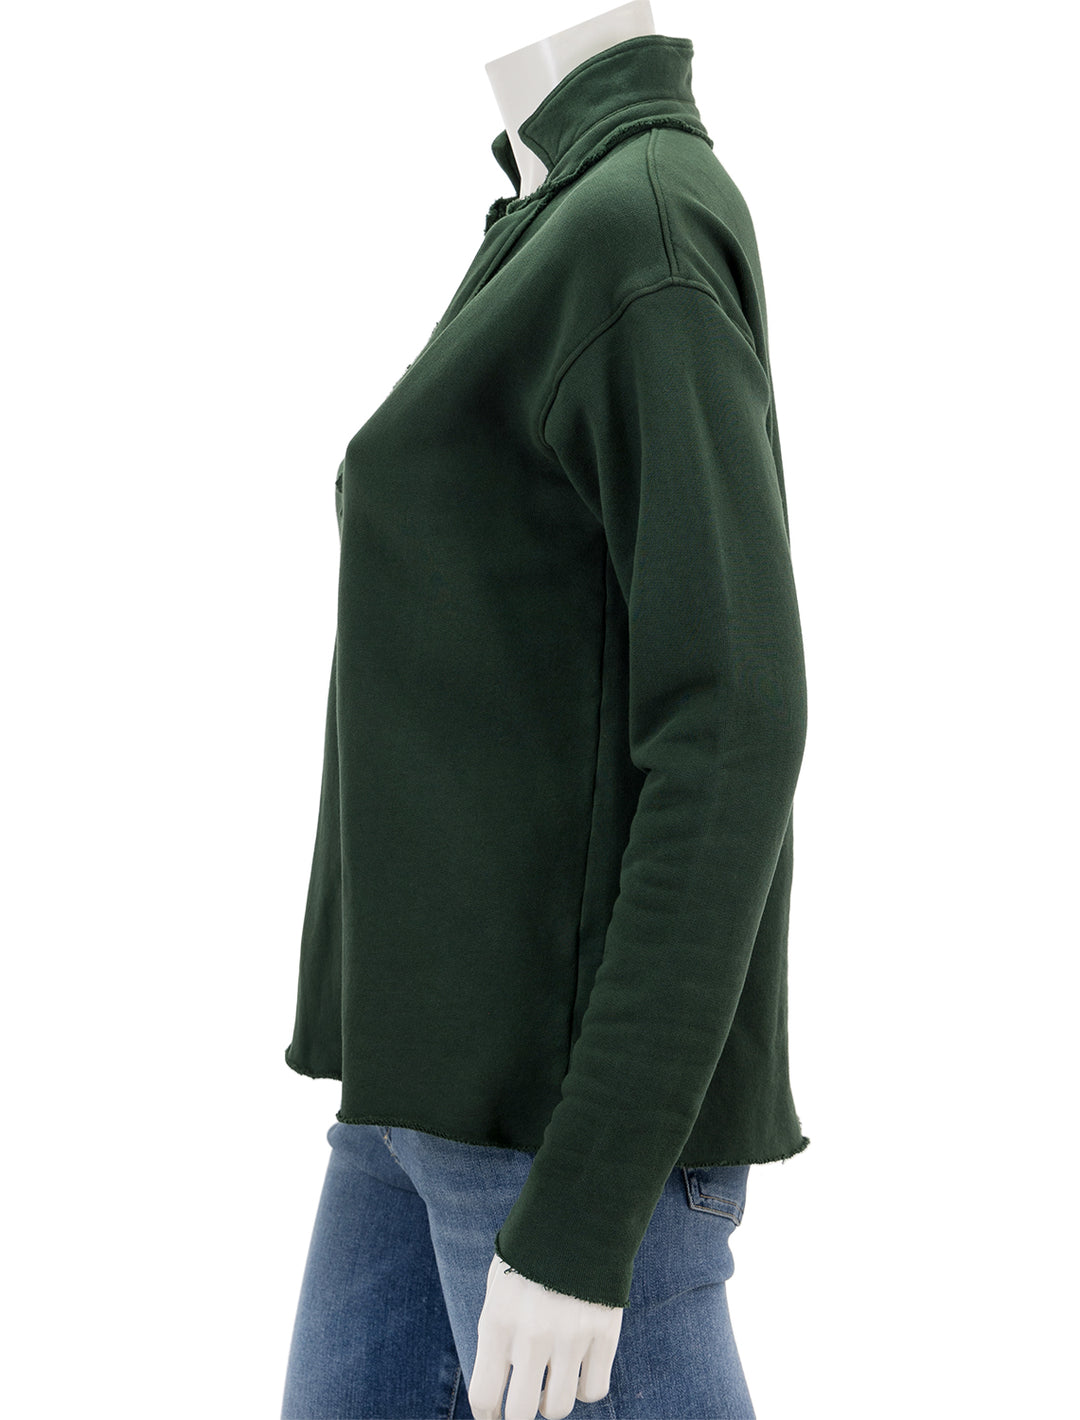 Side view of Frank & Eileen's patrick popover henley in evergreen.